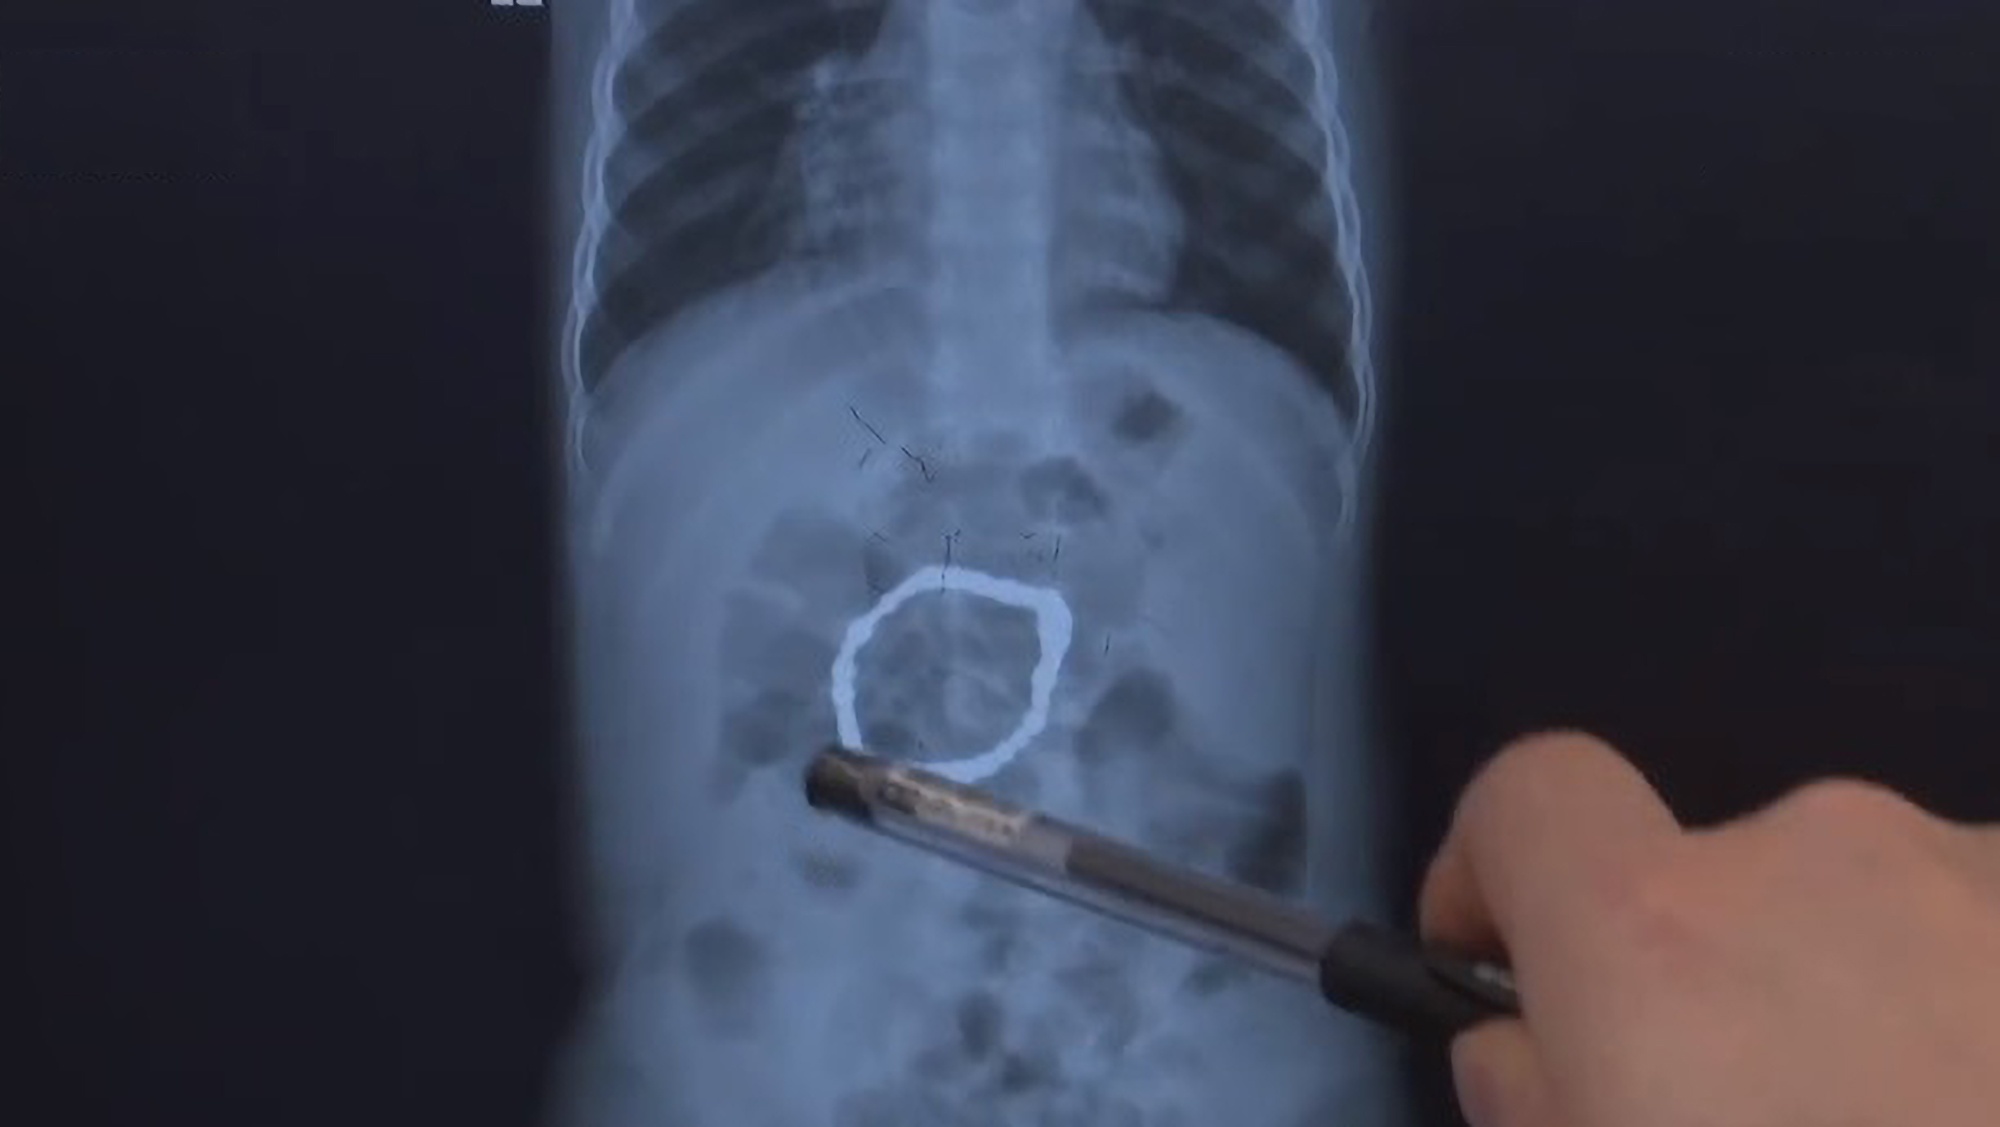 Read more about the article Docs Discovers 32 Metal Beads Inside Tots Tummy That Could Have Punctured Gut After Parents Took Sibling To Hospital Over Cough